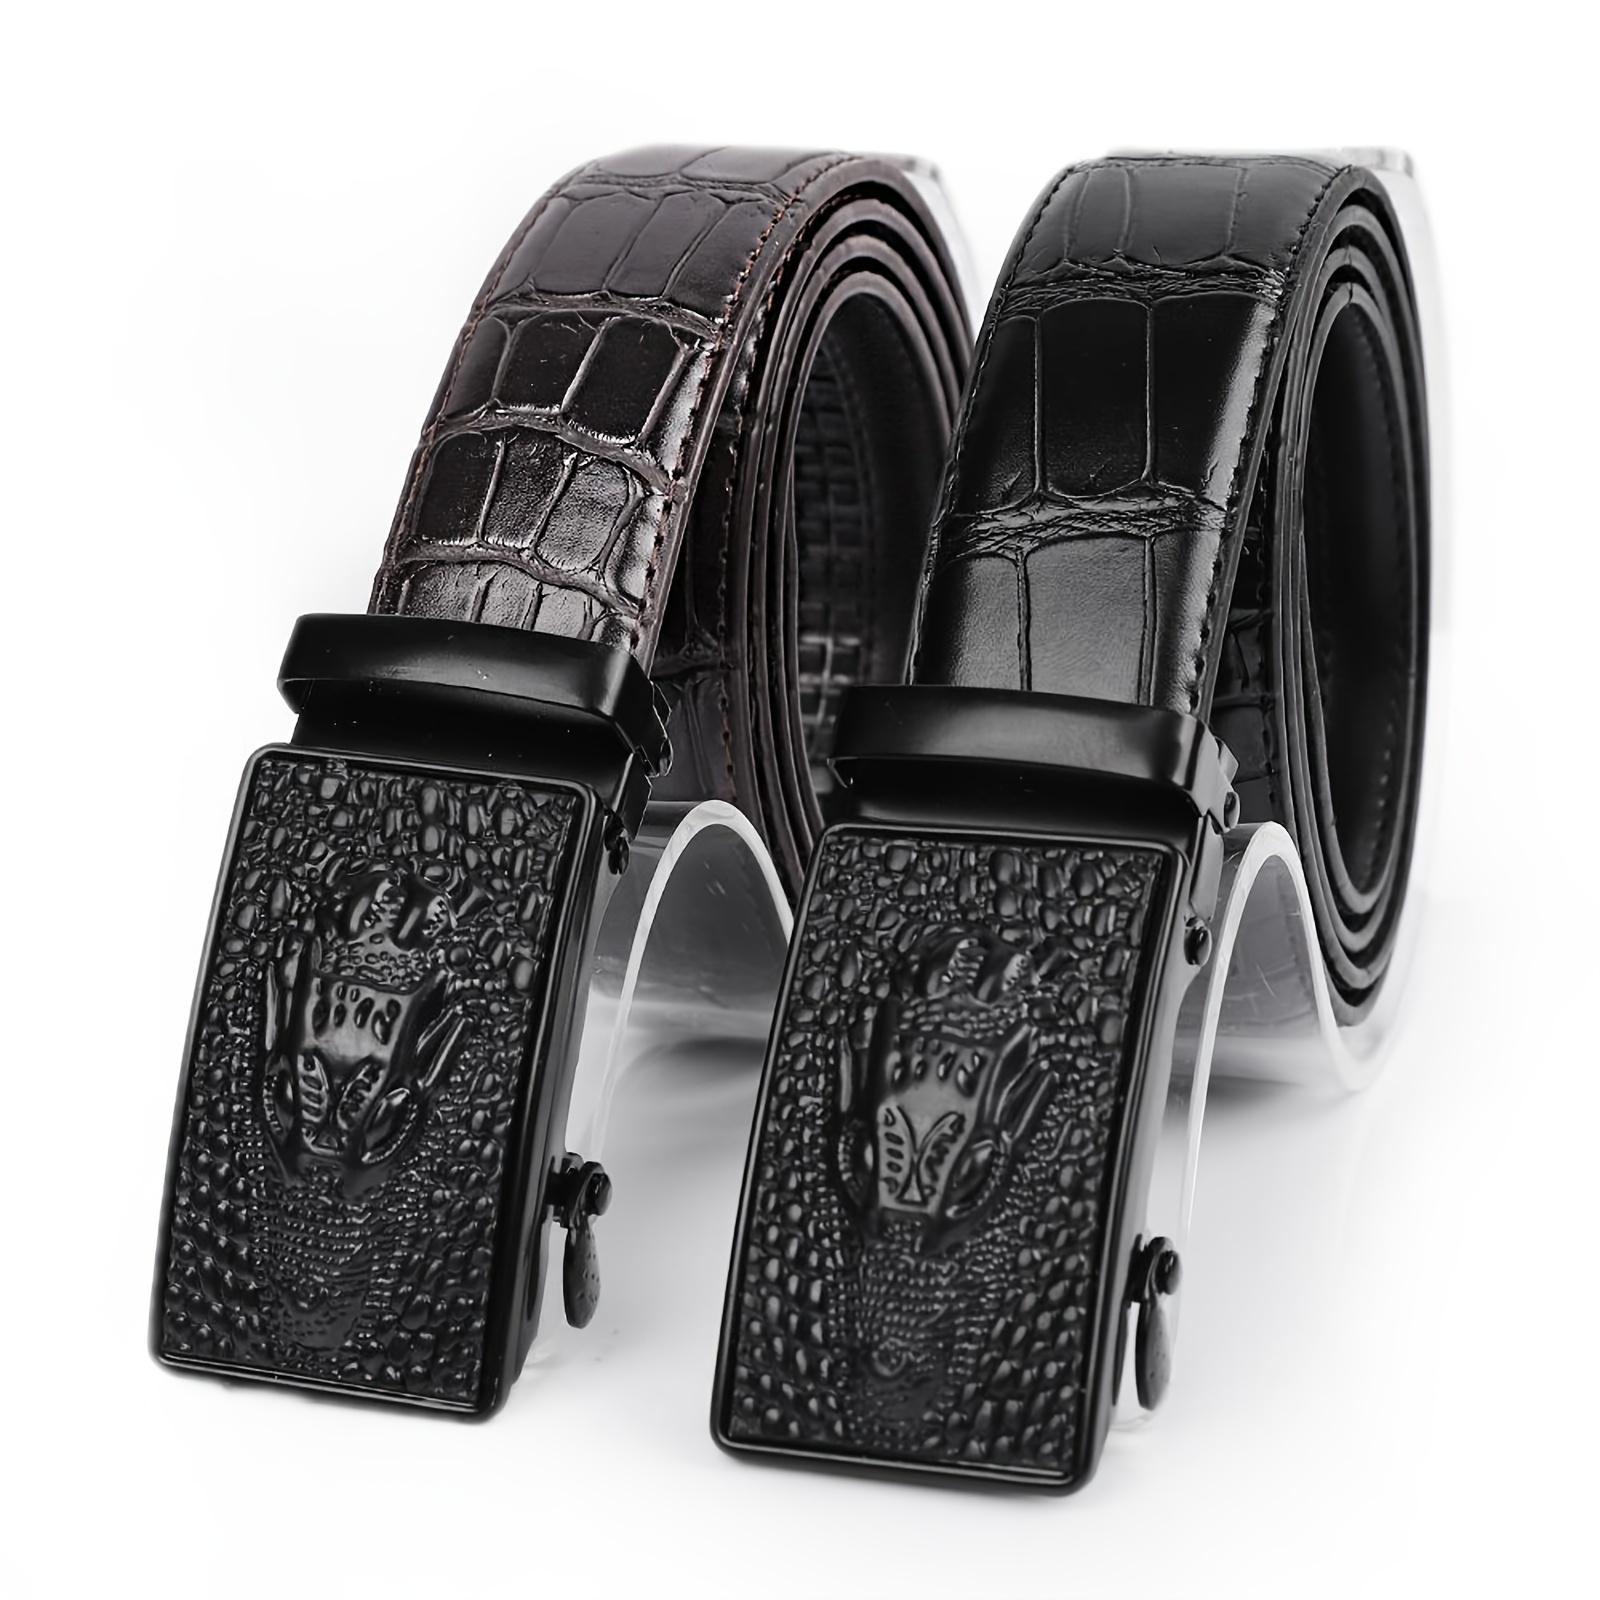 Men's Business Belt with Automatic Buckle